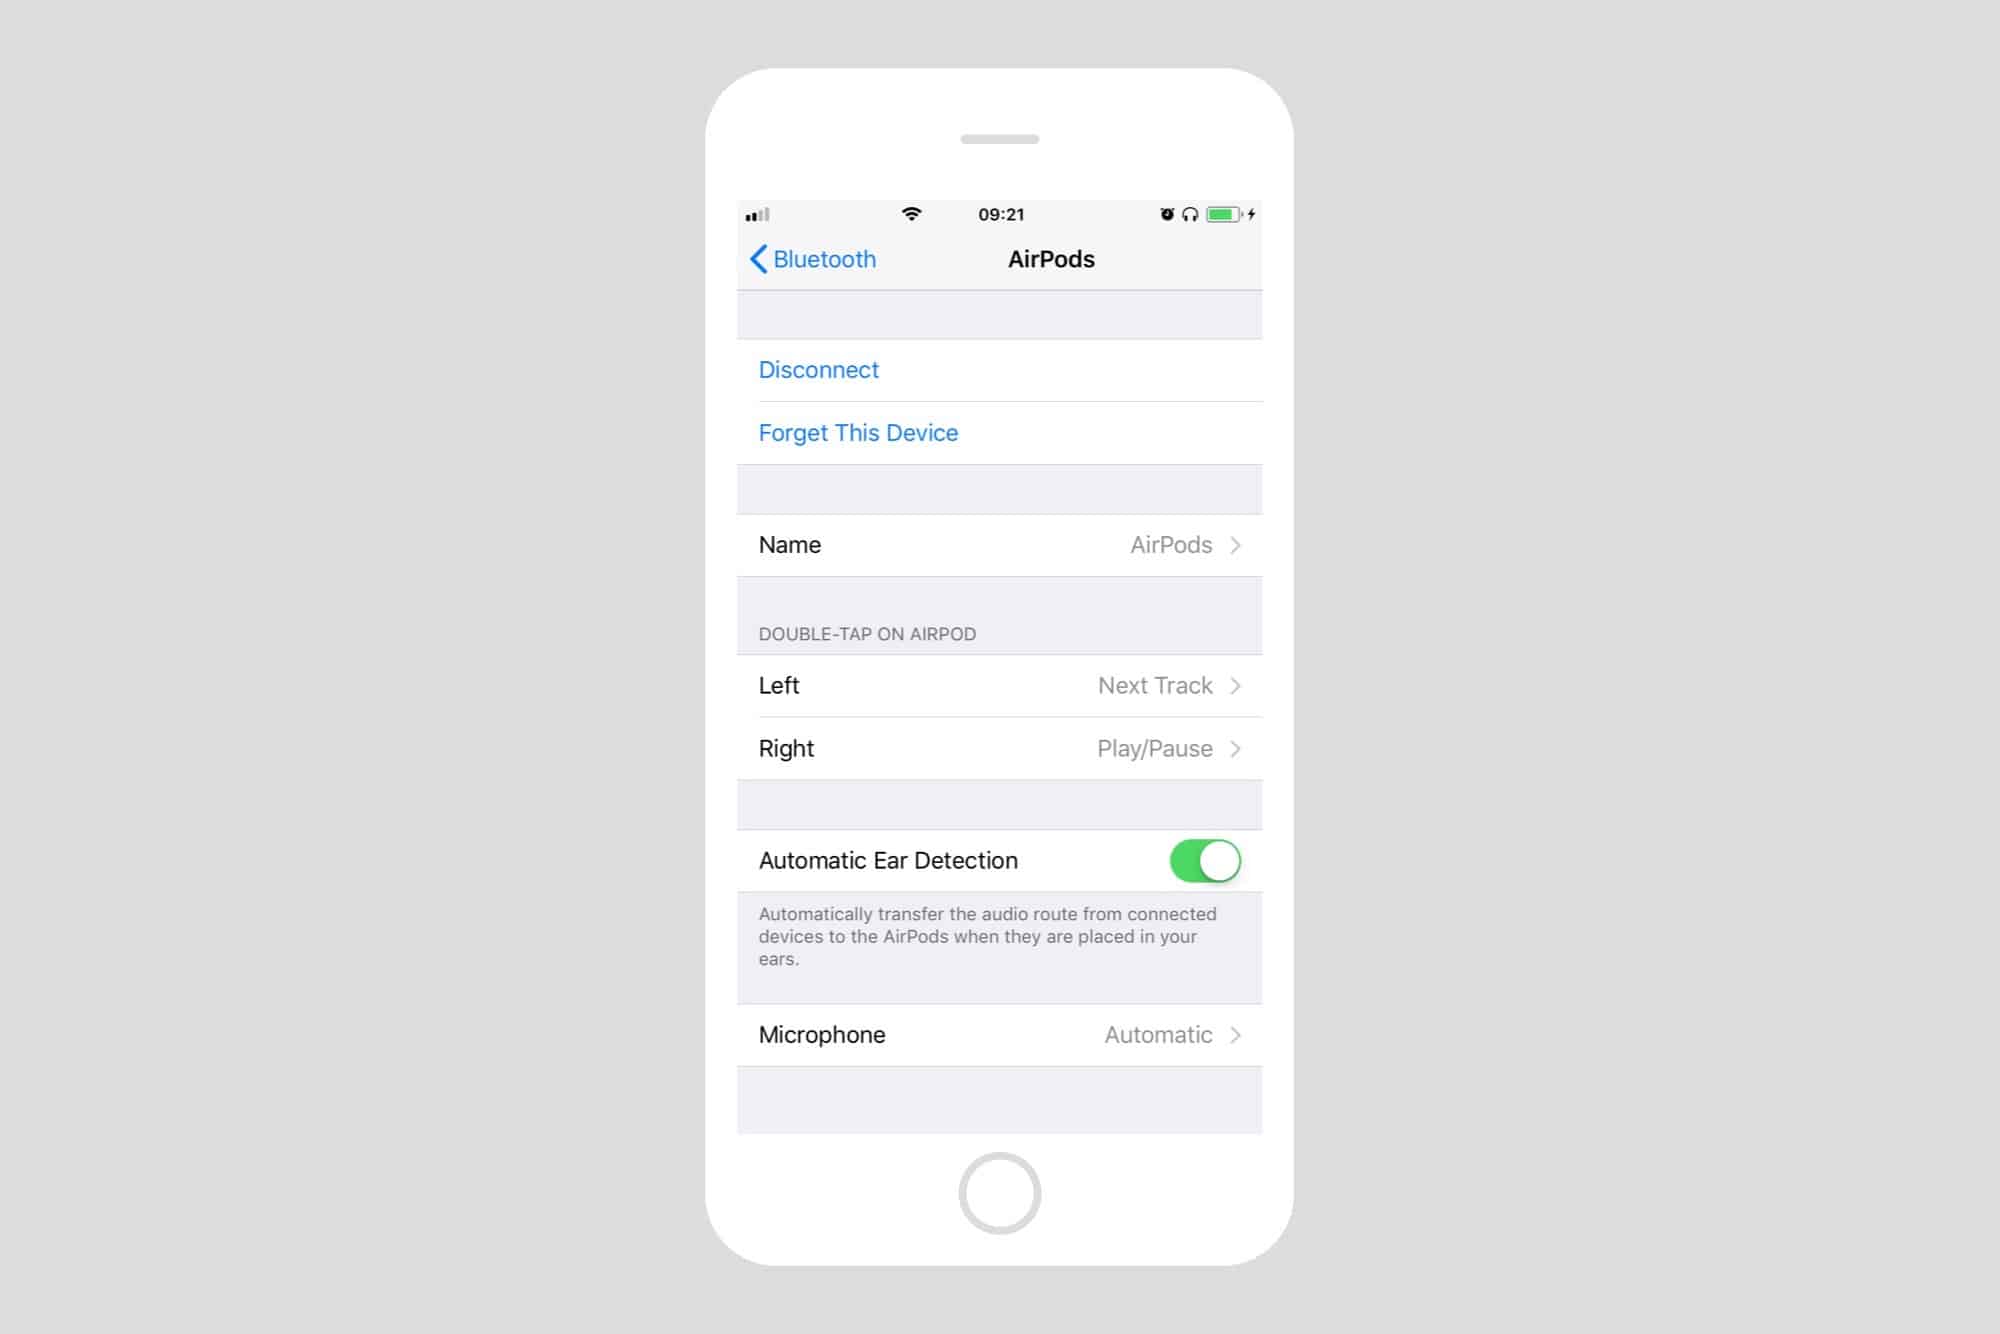 Unpair your AirPods in the Bluetooth settings.